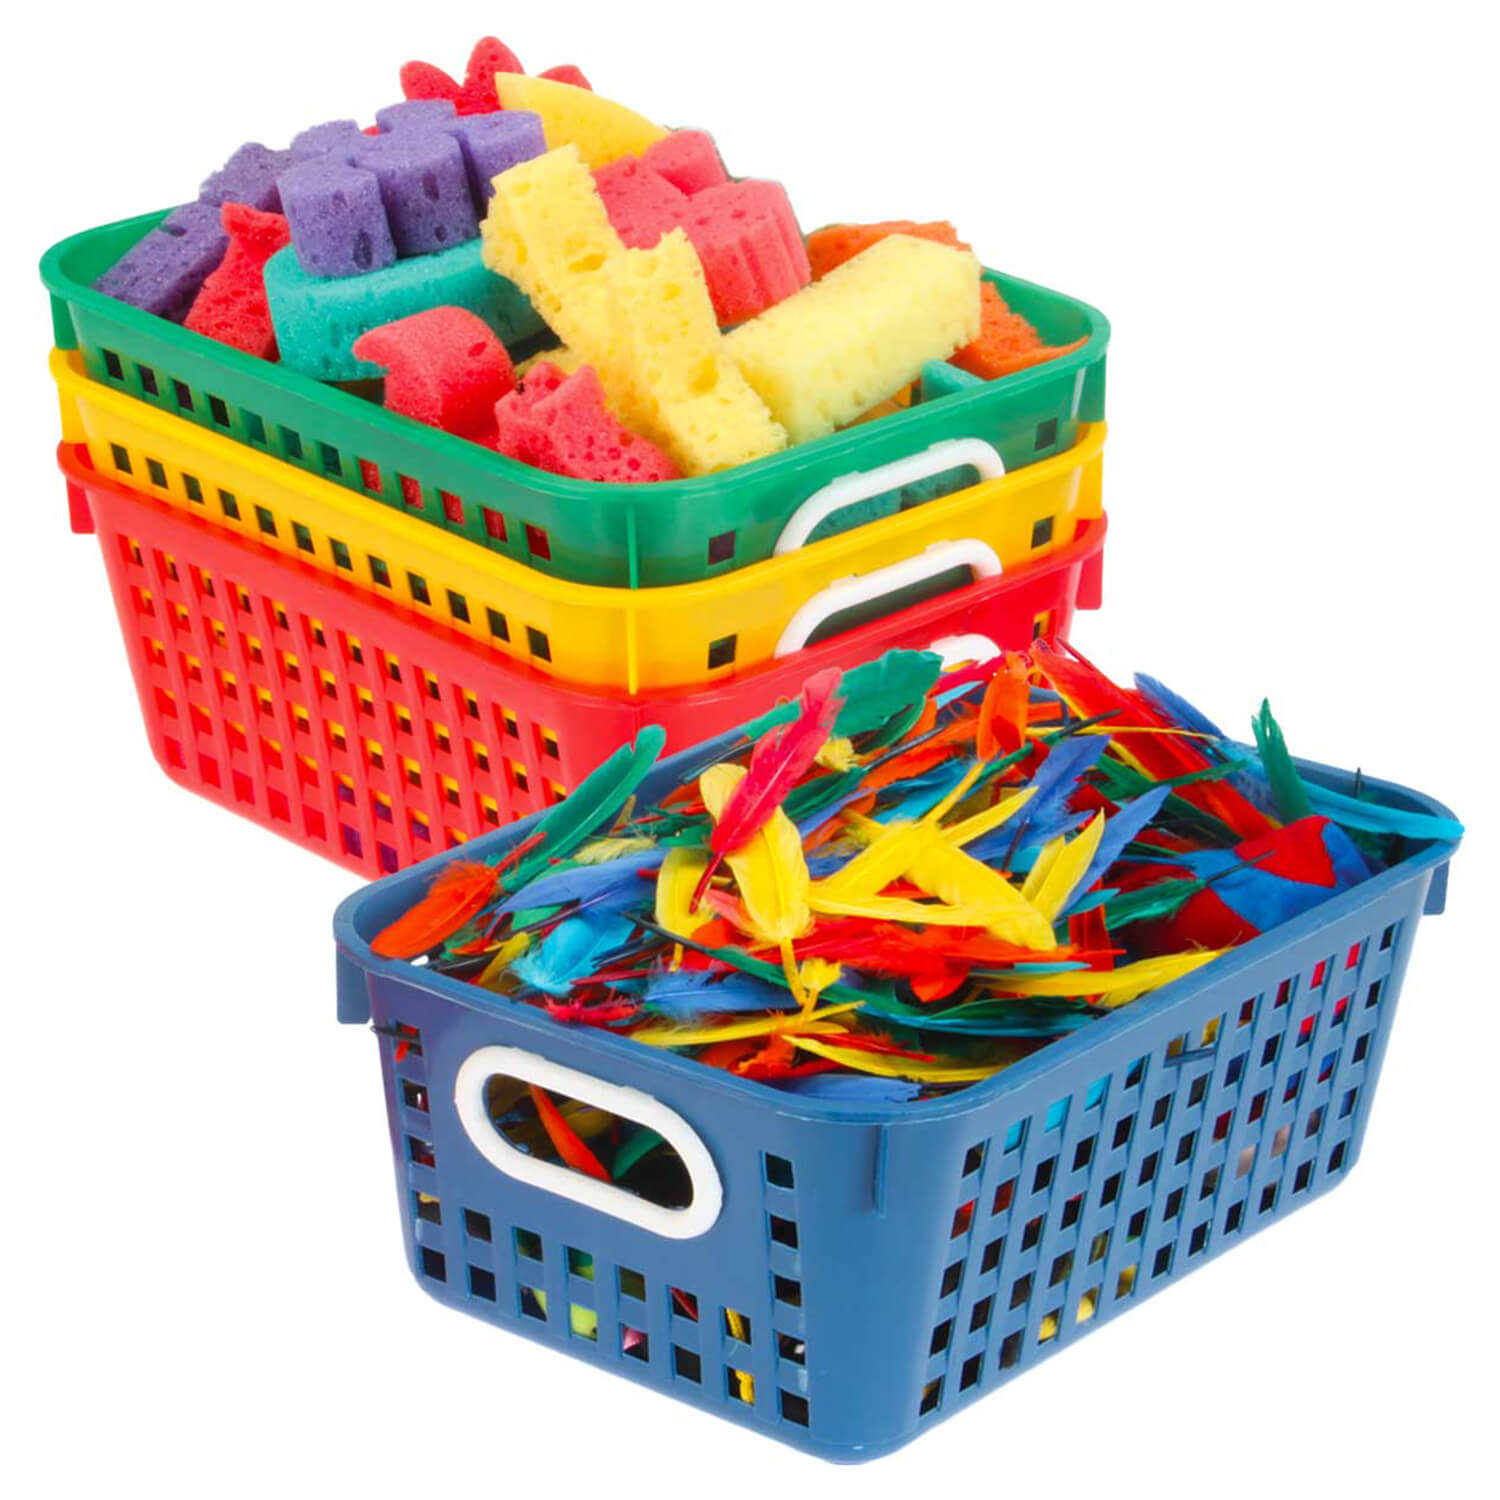 W16485224 Classroom Storage Tall Baskets With Handles - 6 Pc.